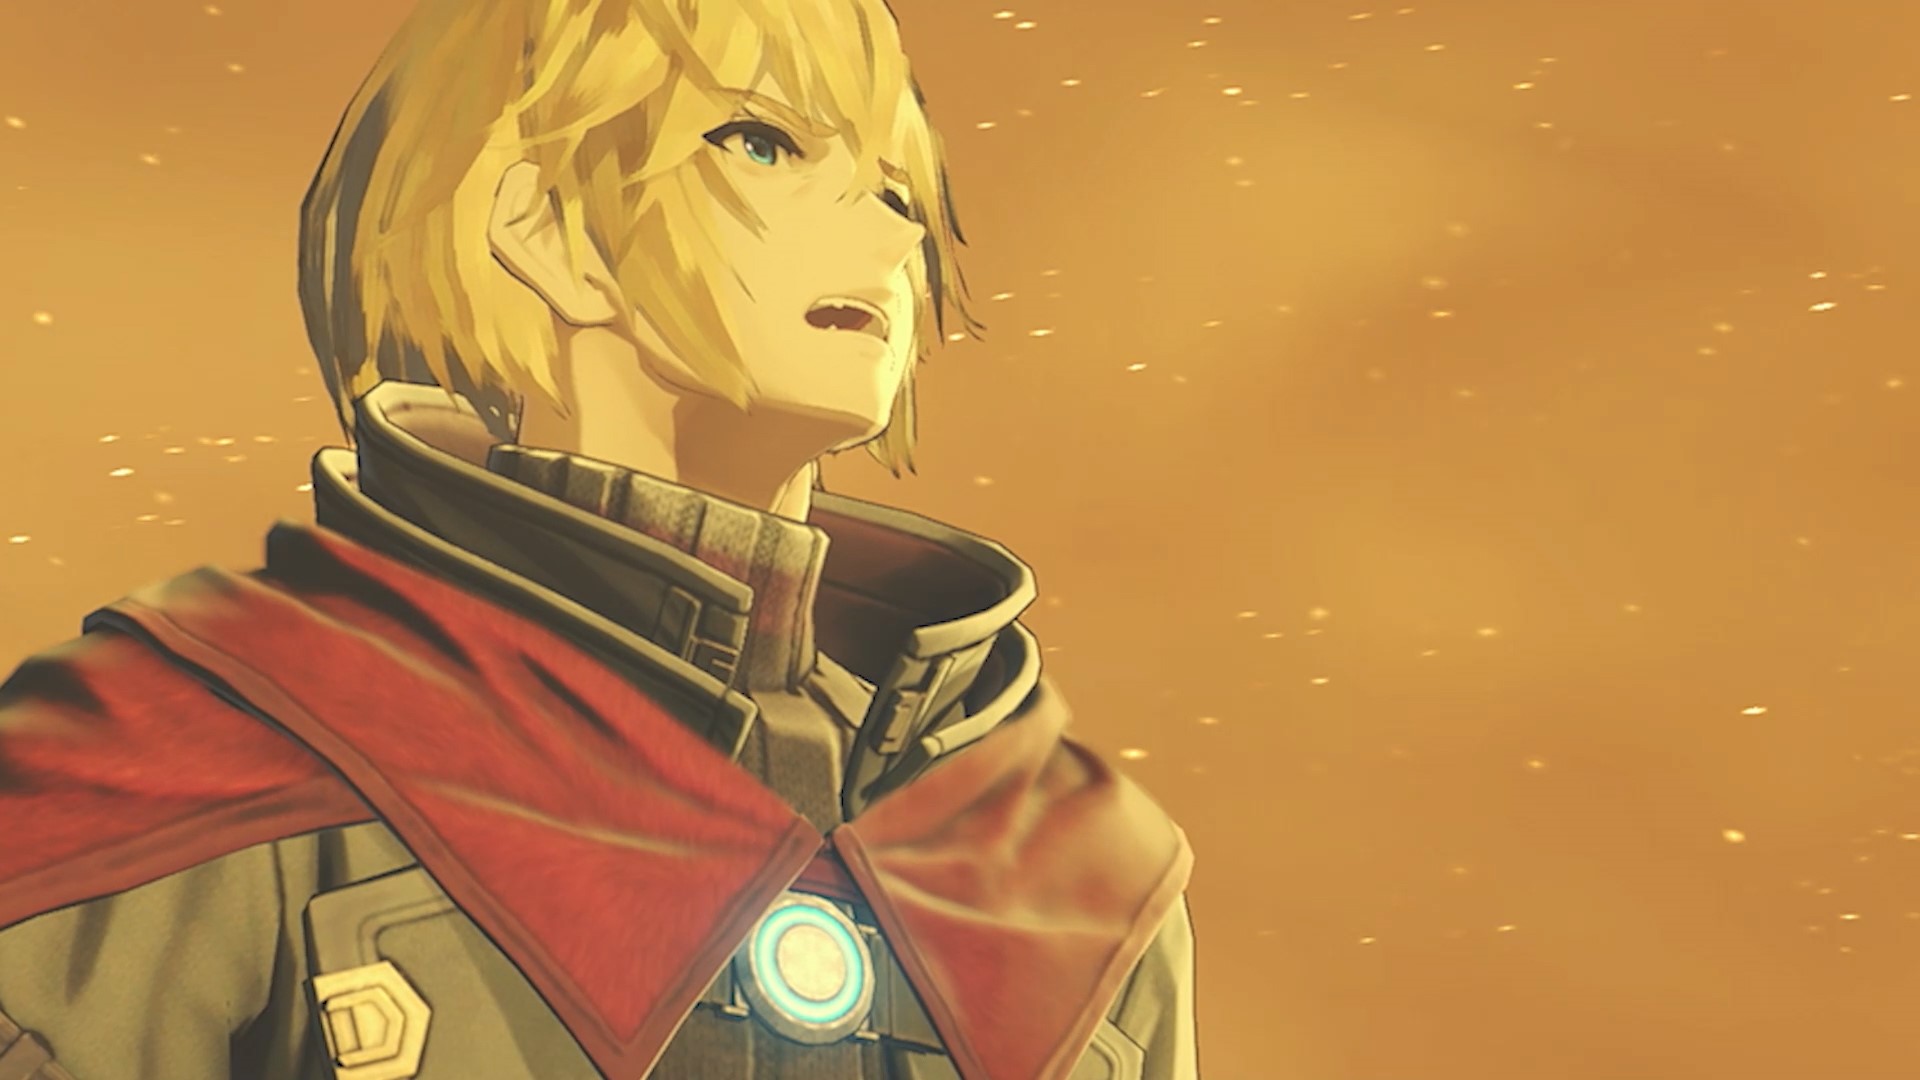 Xenoblade Chronicles 3 Expansion Pass Review (Switch eShop)